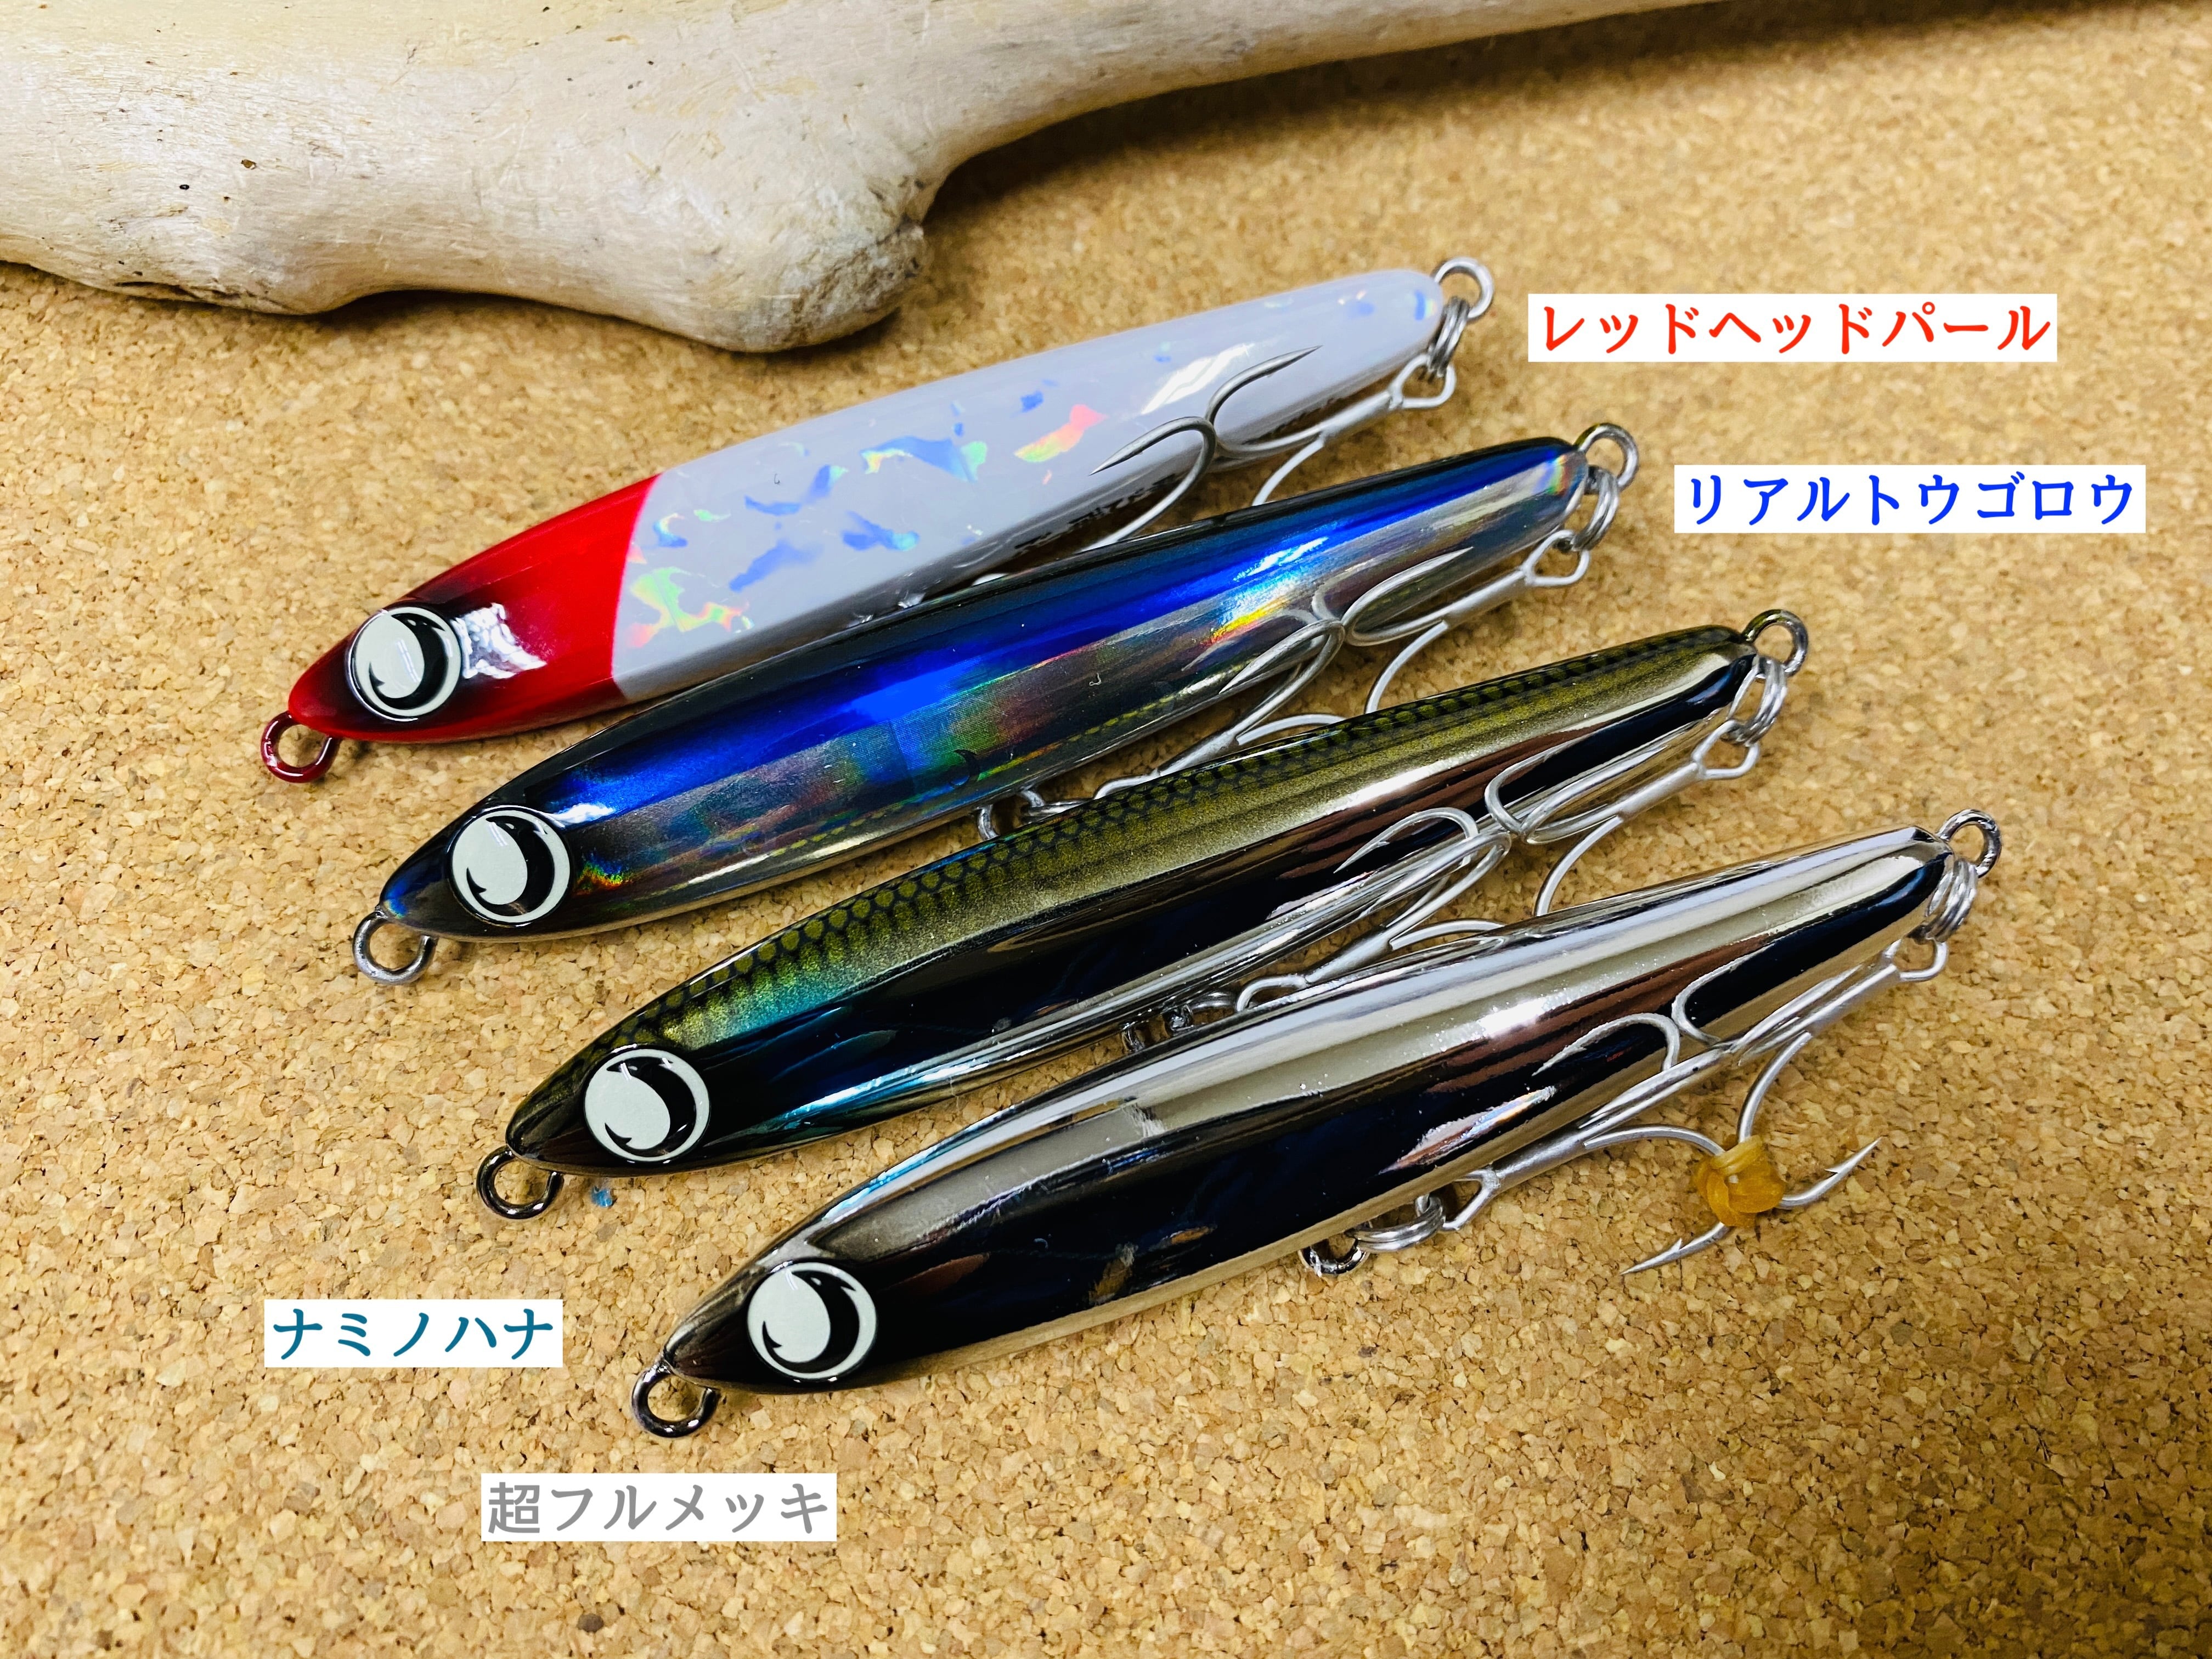 JUMPRIZE ぶっ飛び君95S ラトルSP | Fishing Tackle BLUE MARLIN